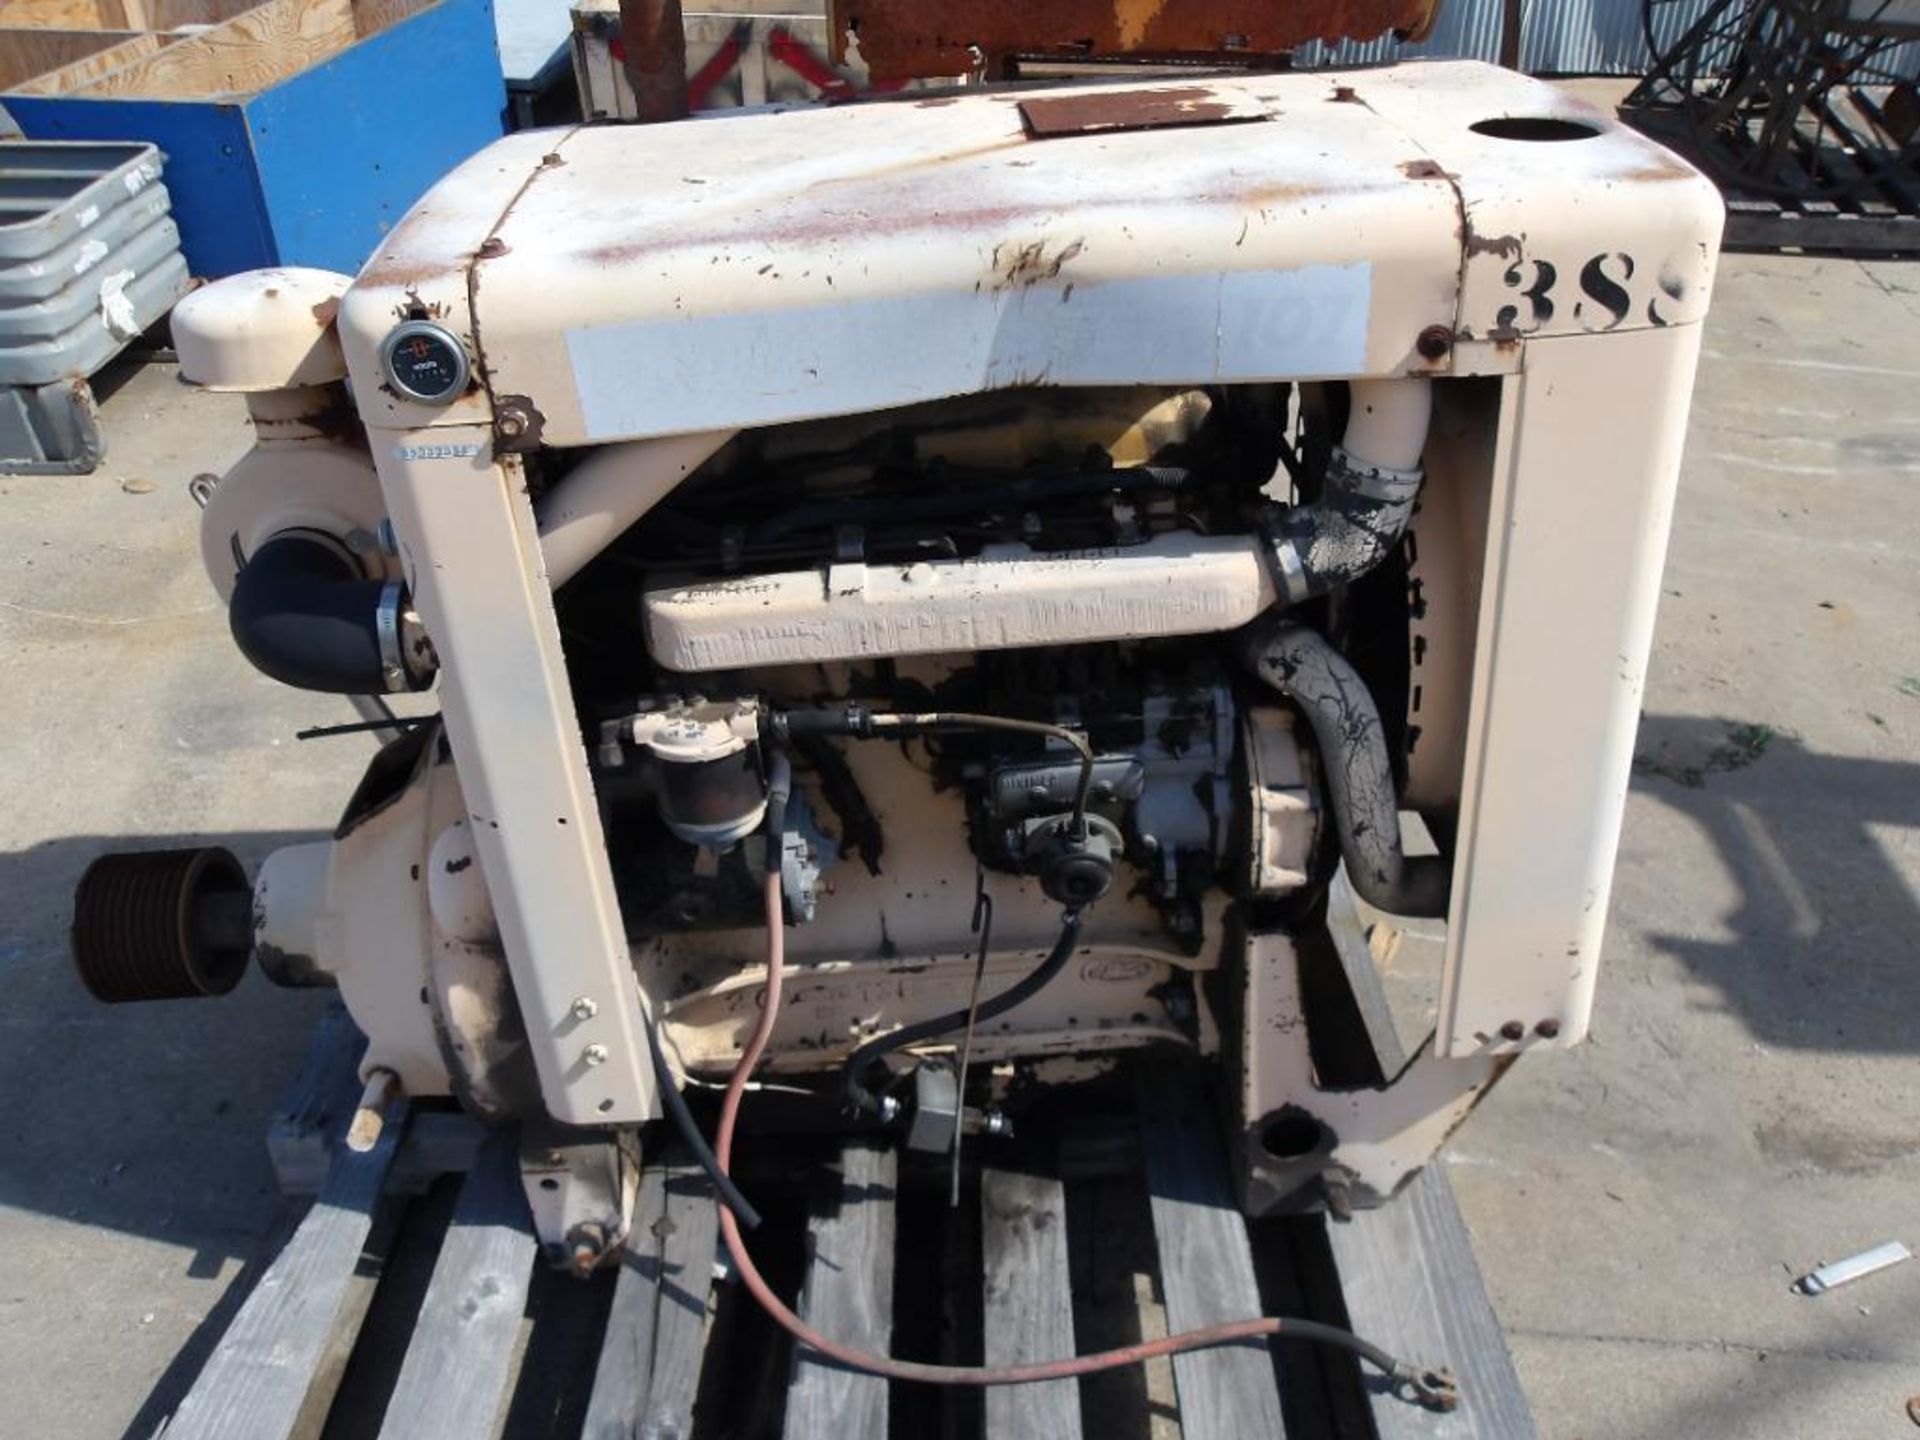 Ford Industrial Motor (Used), 4-Cylinder, Diesel, & PTO Unit - Image 3 of 4